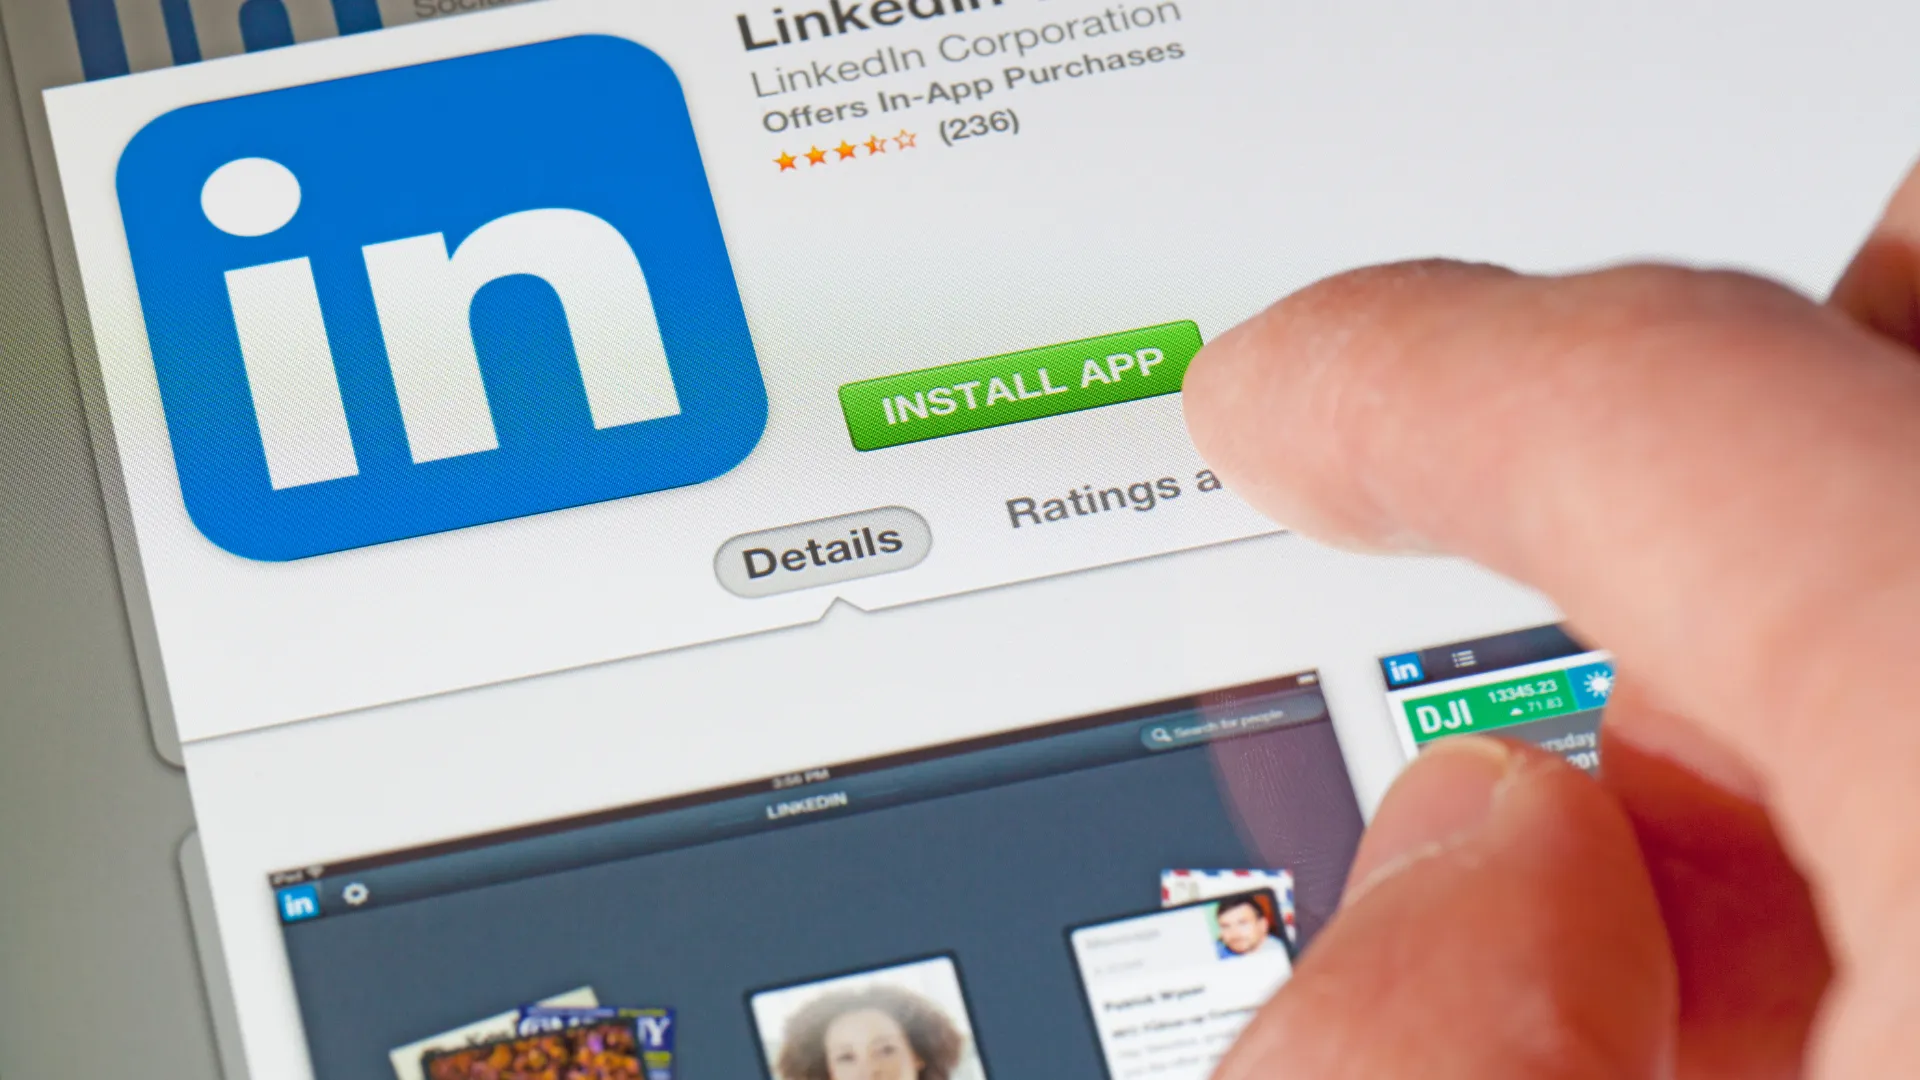 If you're looking to invest your money, it's important to thoroughly research and choose a legitimate investment platform to avoid falling victim to investment scams on LinkedIn or other social media sites